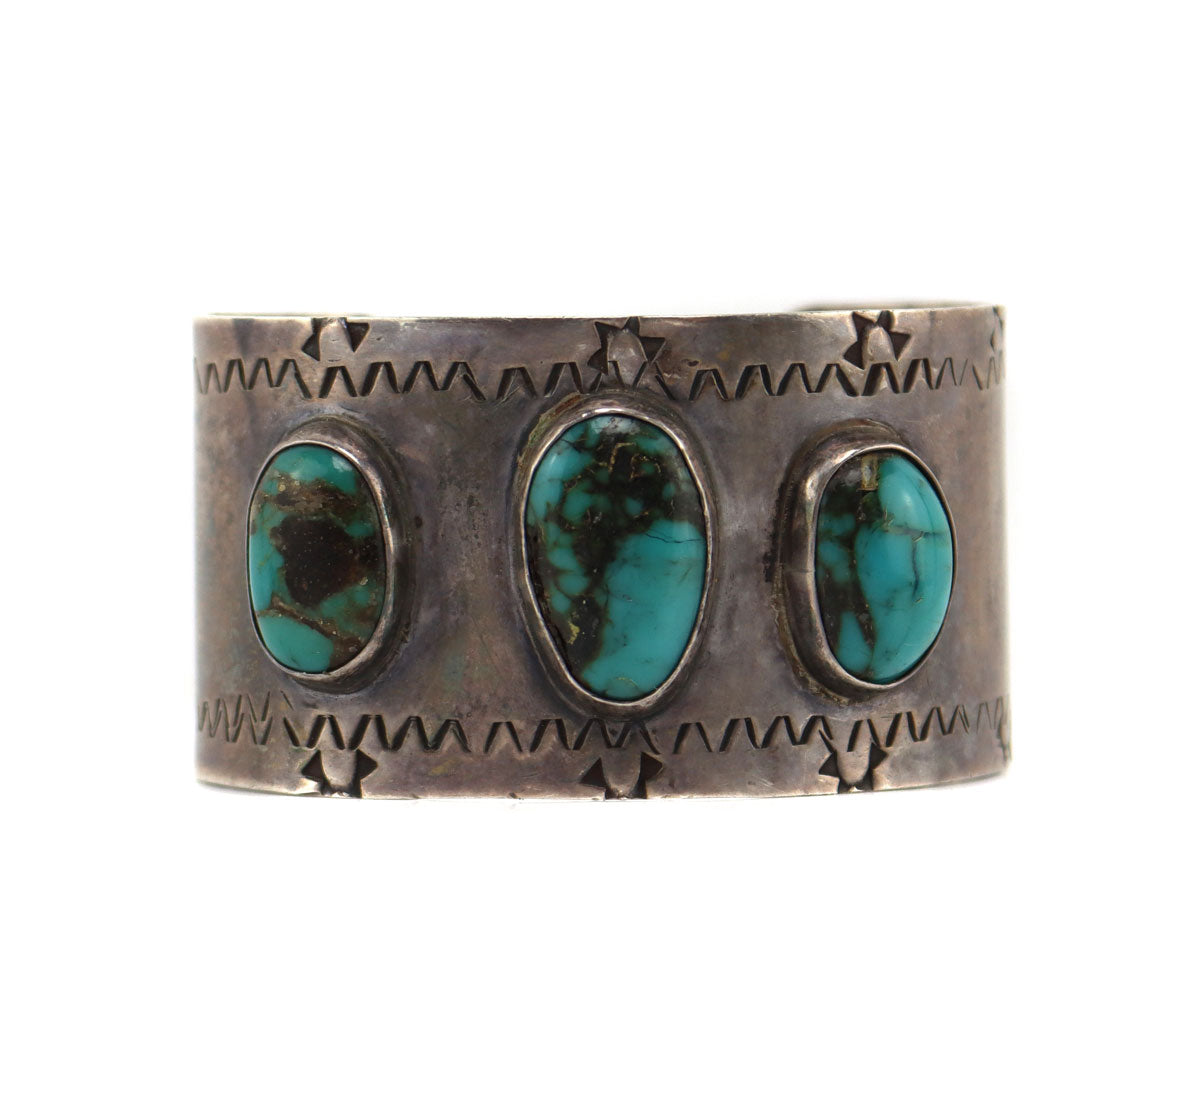 Navajo - Turquoise and Silver Bracelet with Stamped Design c. 1940-50s